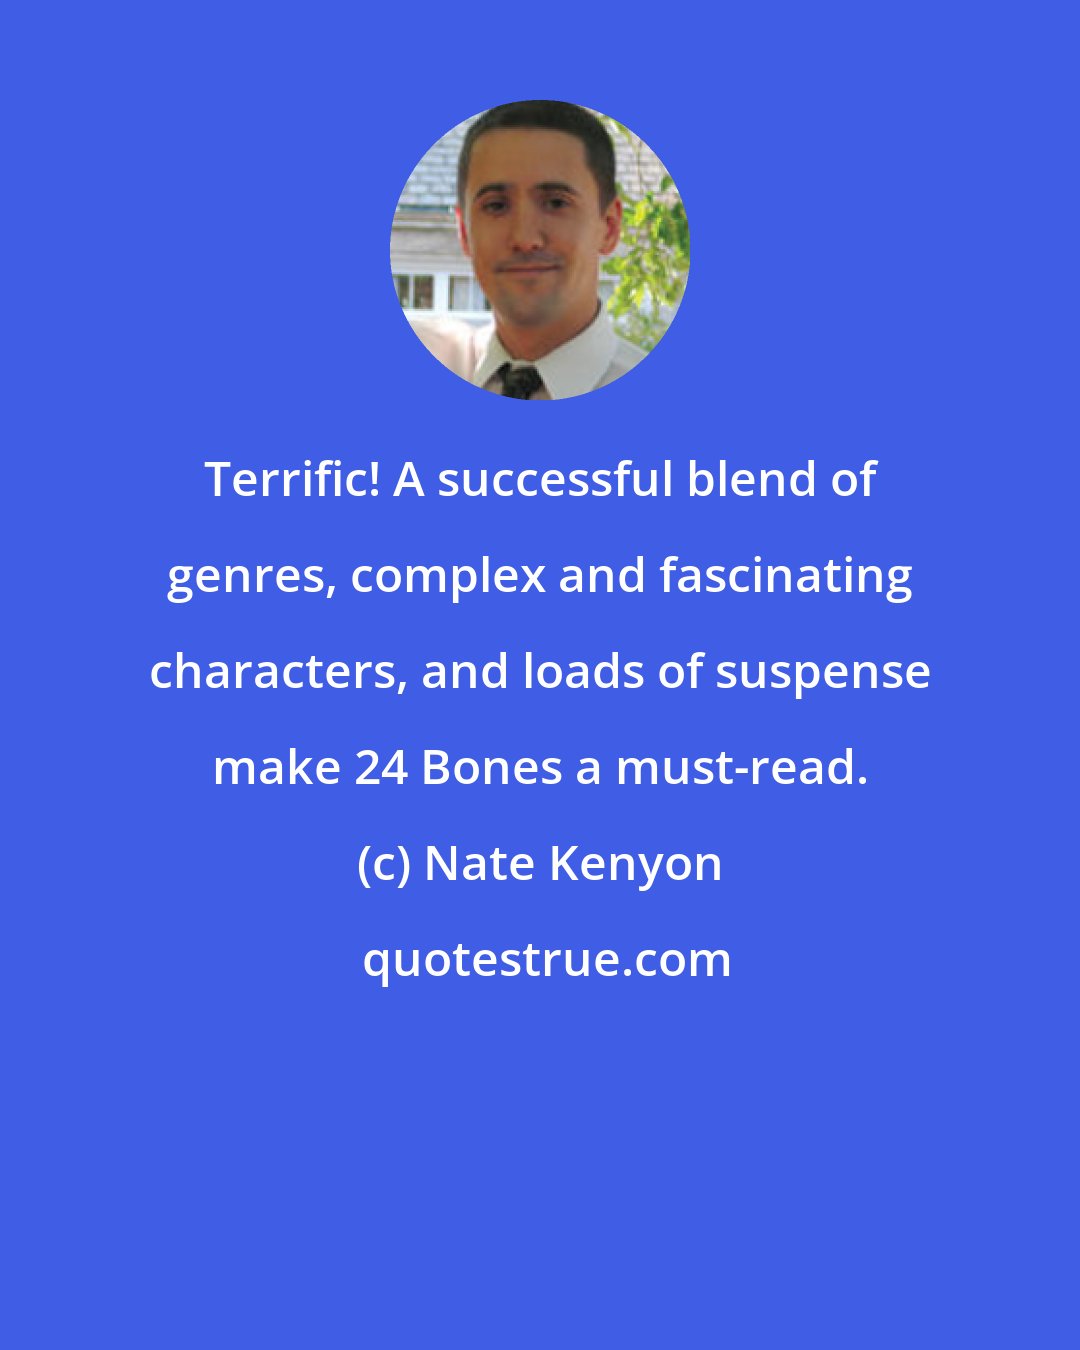 Nate Kenyon: Terrific! A successful blend of genres, complex and fascinating characters, and loads of suspense make 24 Bones a must-read.